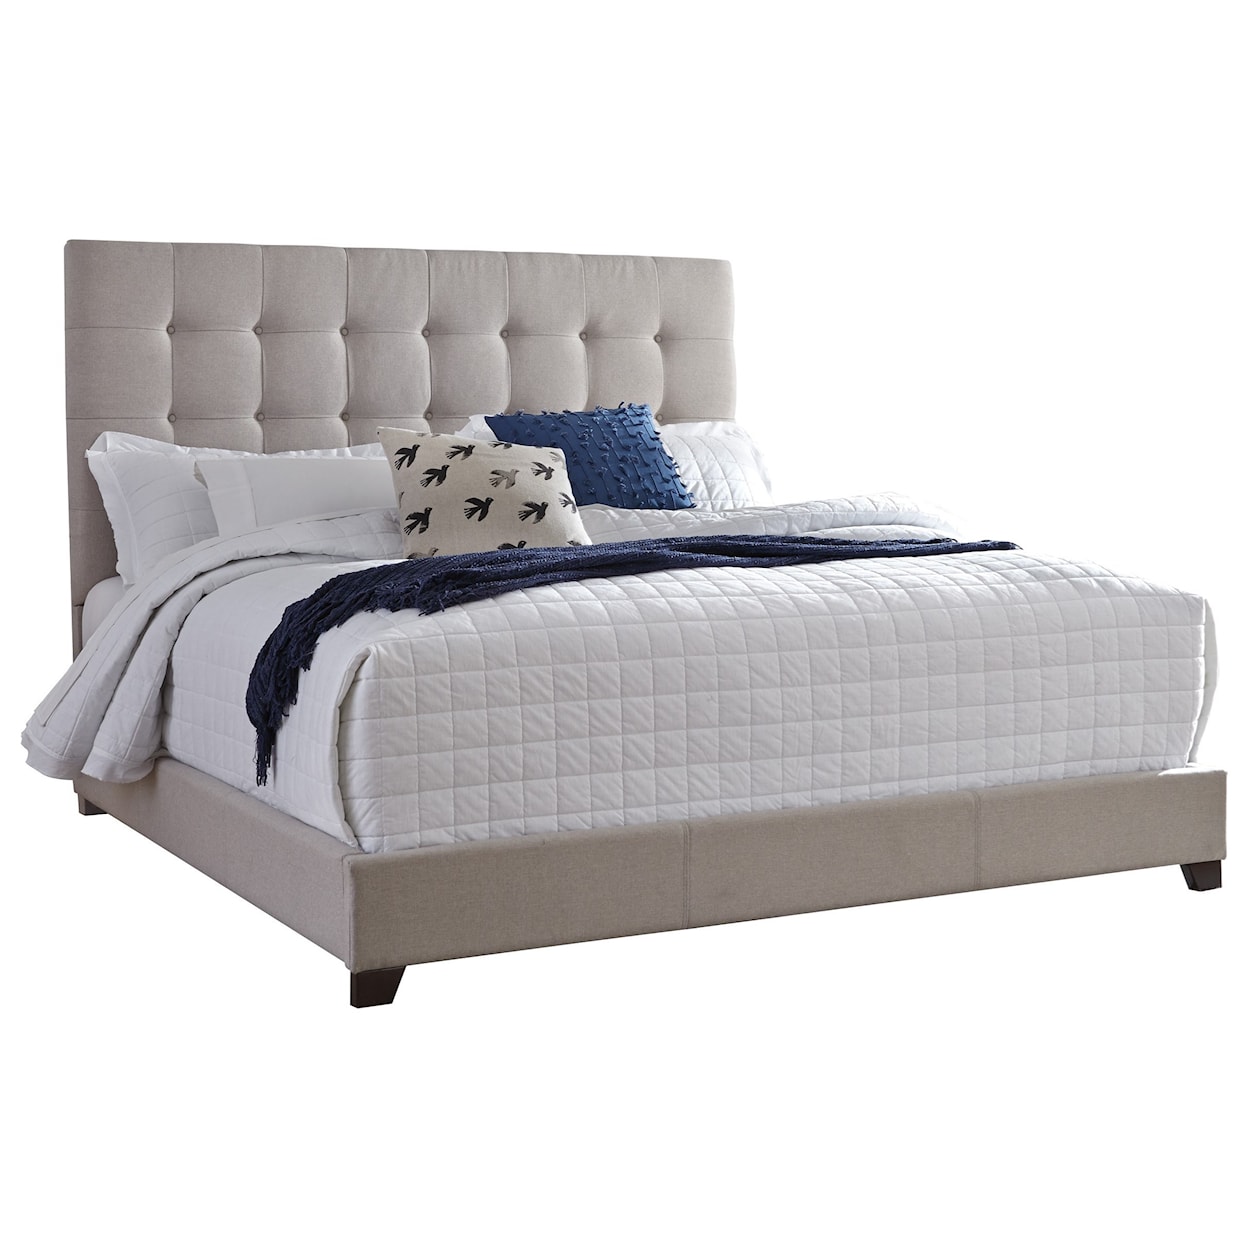 Signature Design by Ashley Dolante King Upholstered Bed